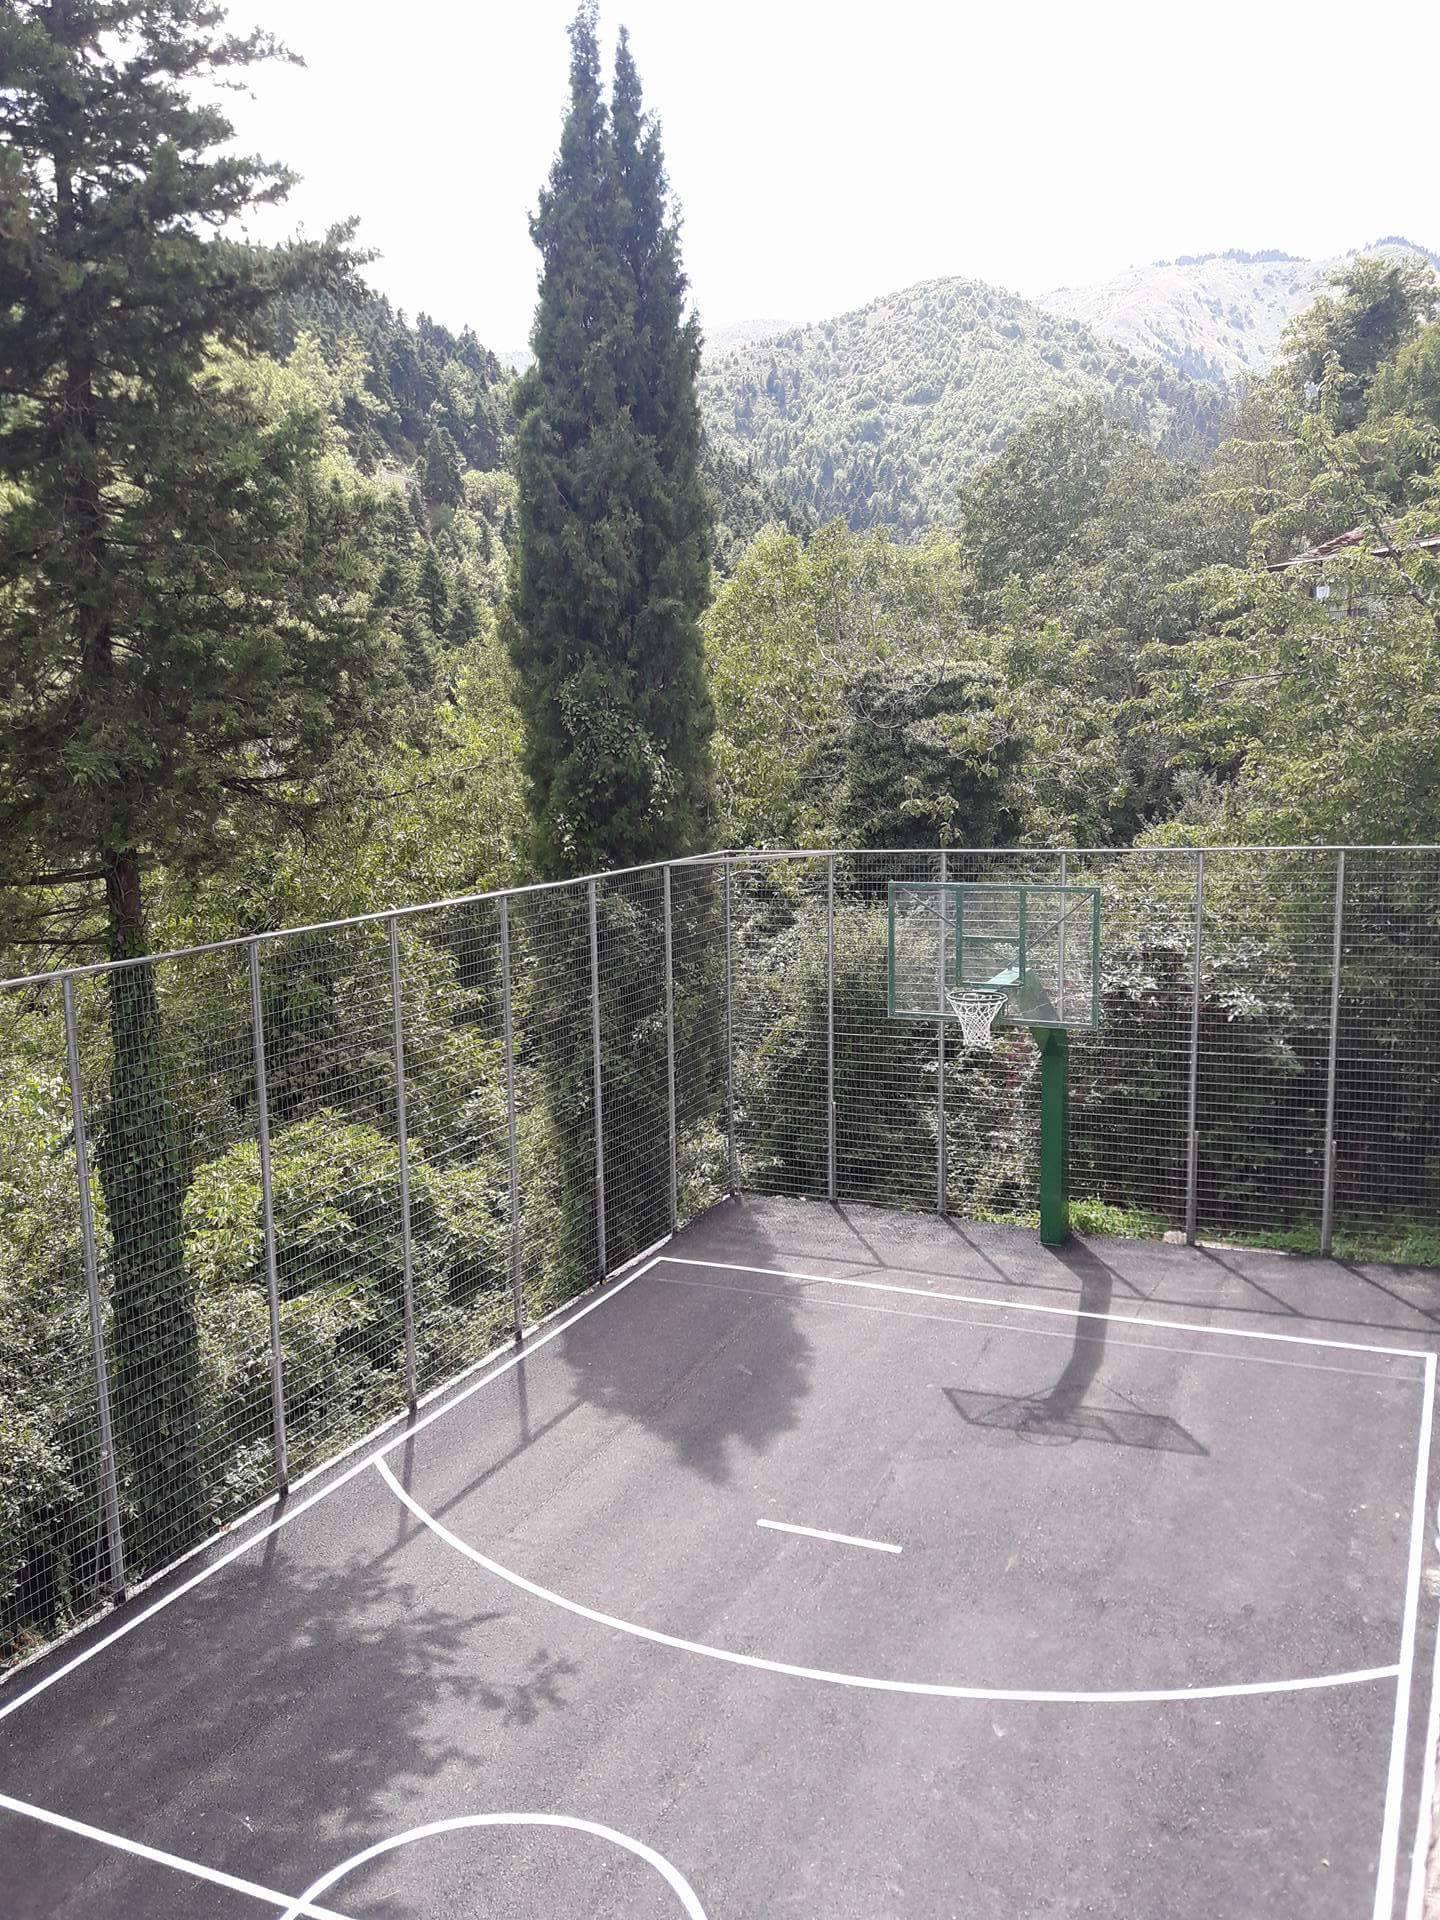 Image of a basketball hoop near the forest